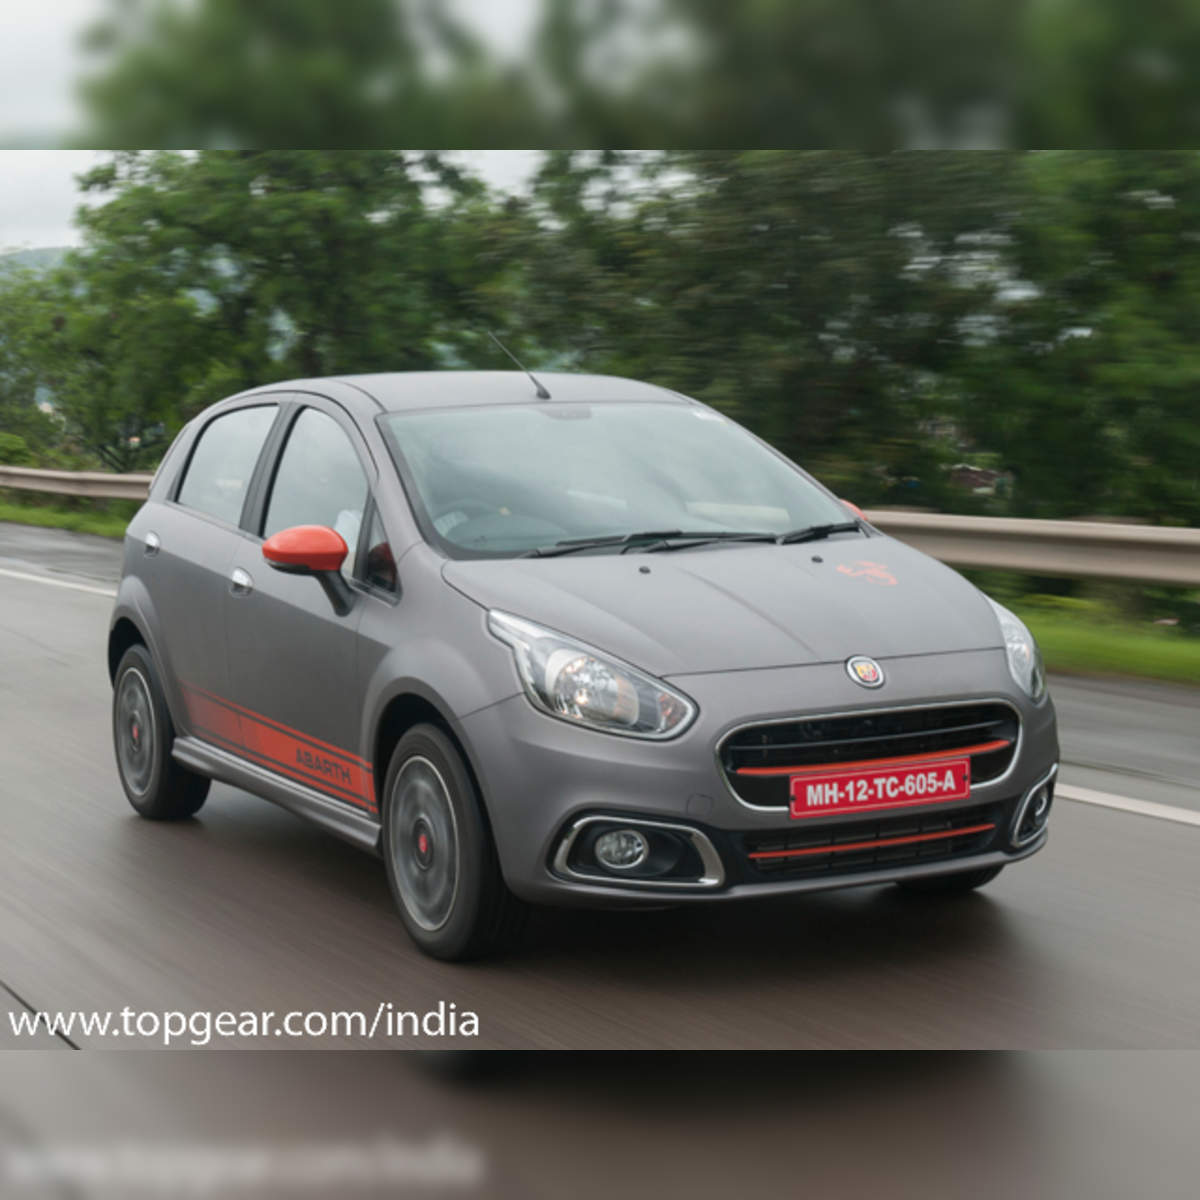 Fiat is ready with India's first true 'hot' hatch: Abarth Punto